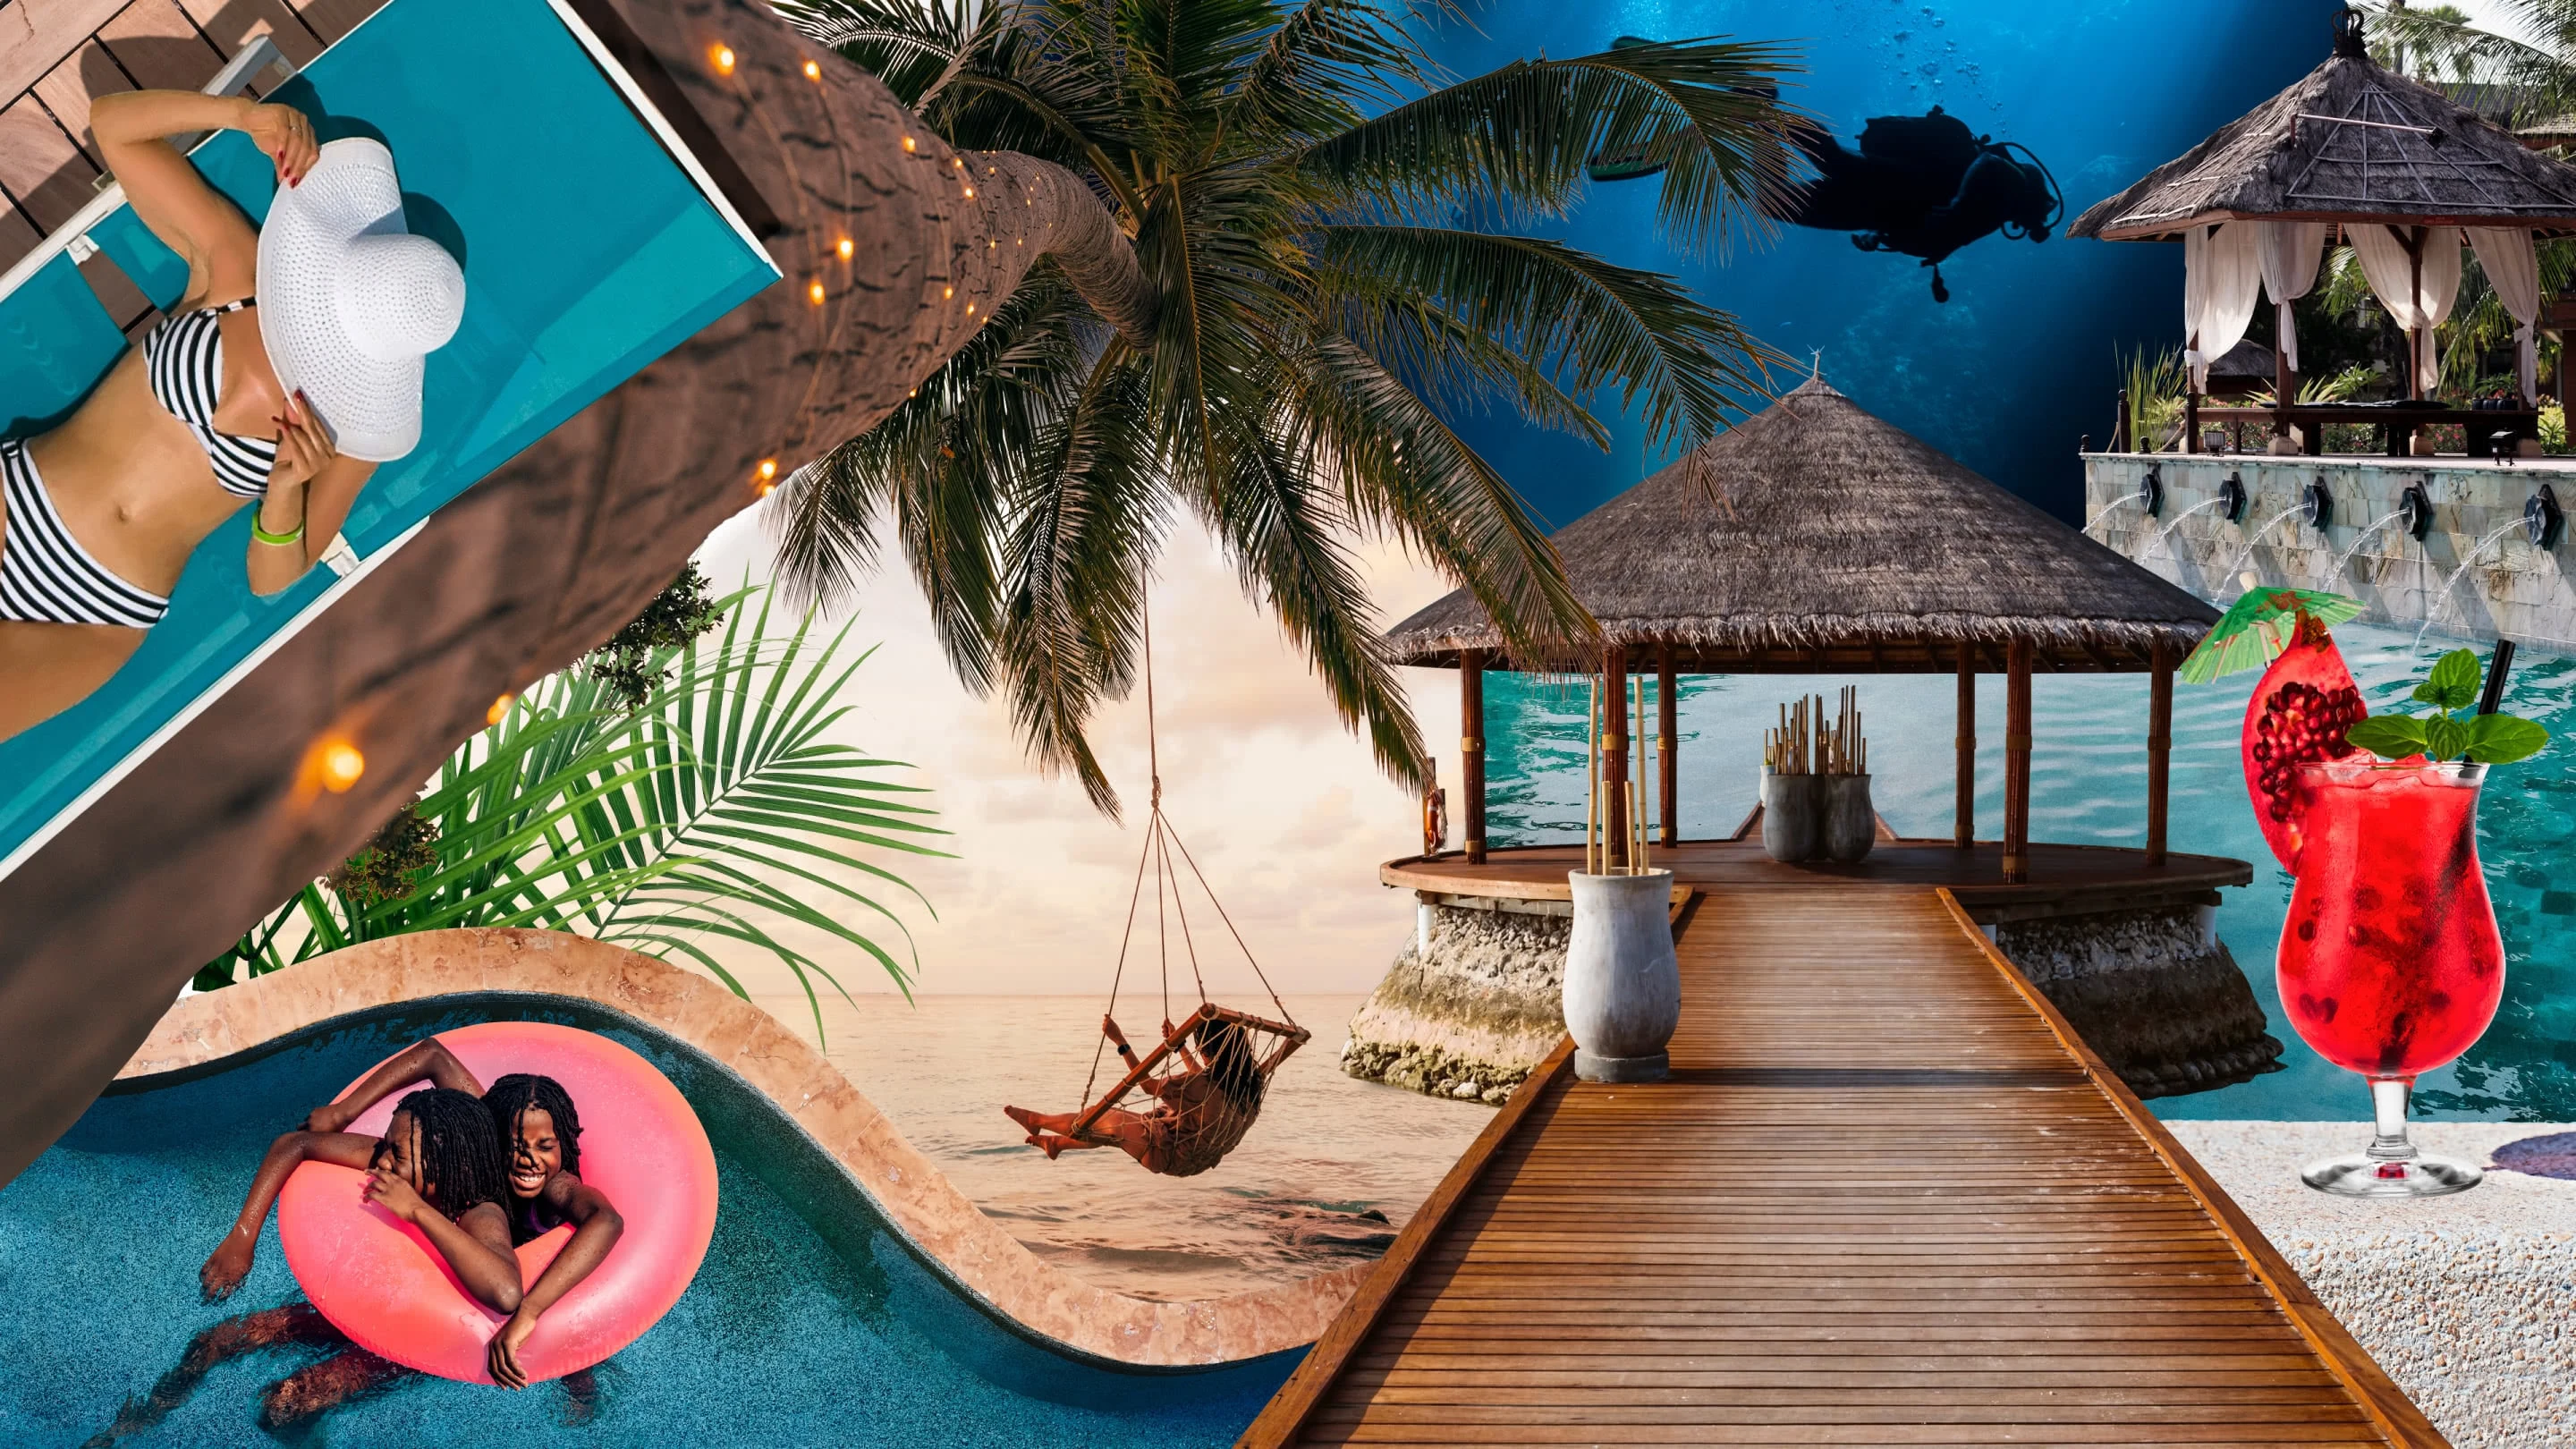 Collage of holiday spots. On the top left, a white woman is sunbathing in a bikini. On the bottom left, two Black children are on a pink inflatable. In the centre, a woman is swinging on a macramé swing in the distance. A bohio. At the top right, there is a scuba diver and at the bottom right there is a pomegranate cocktail.